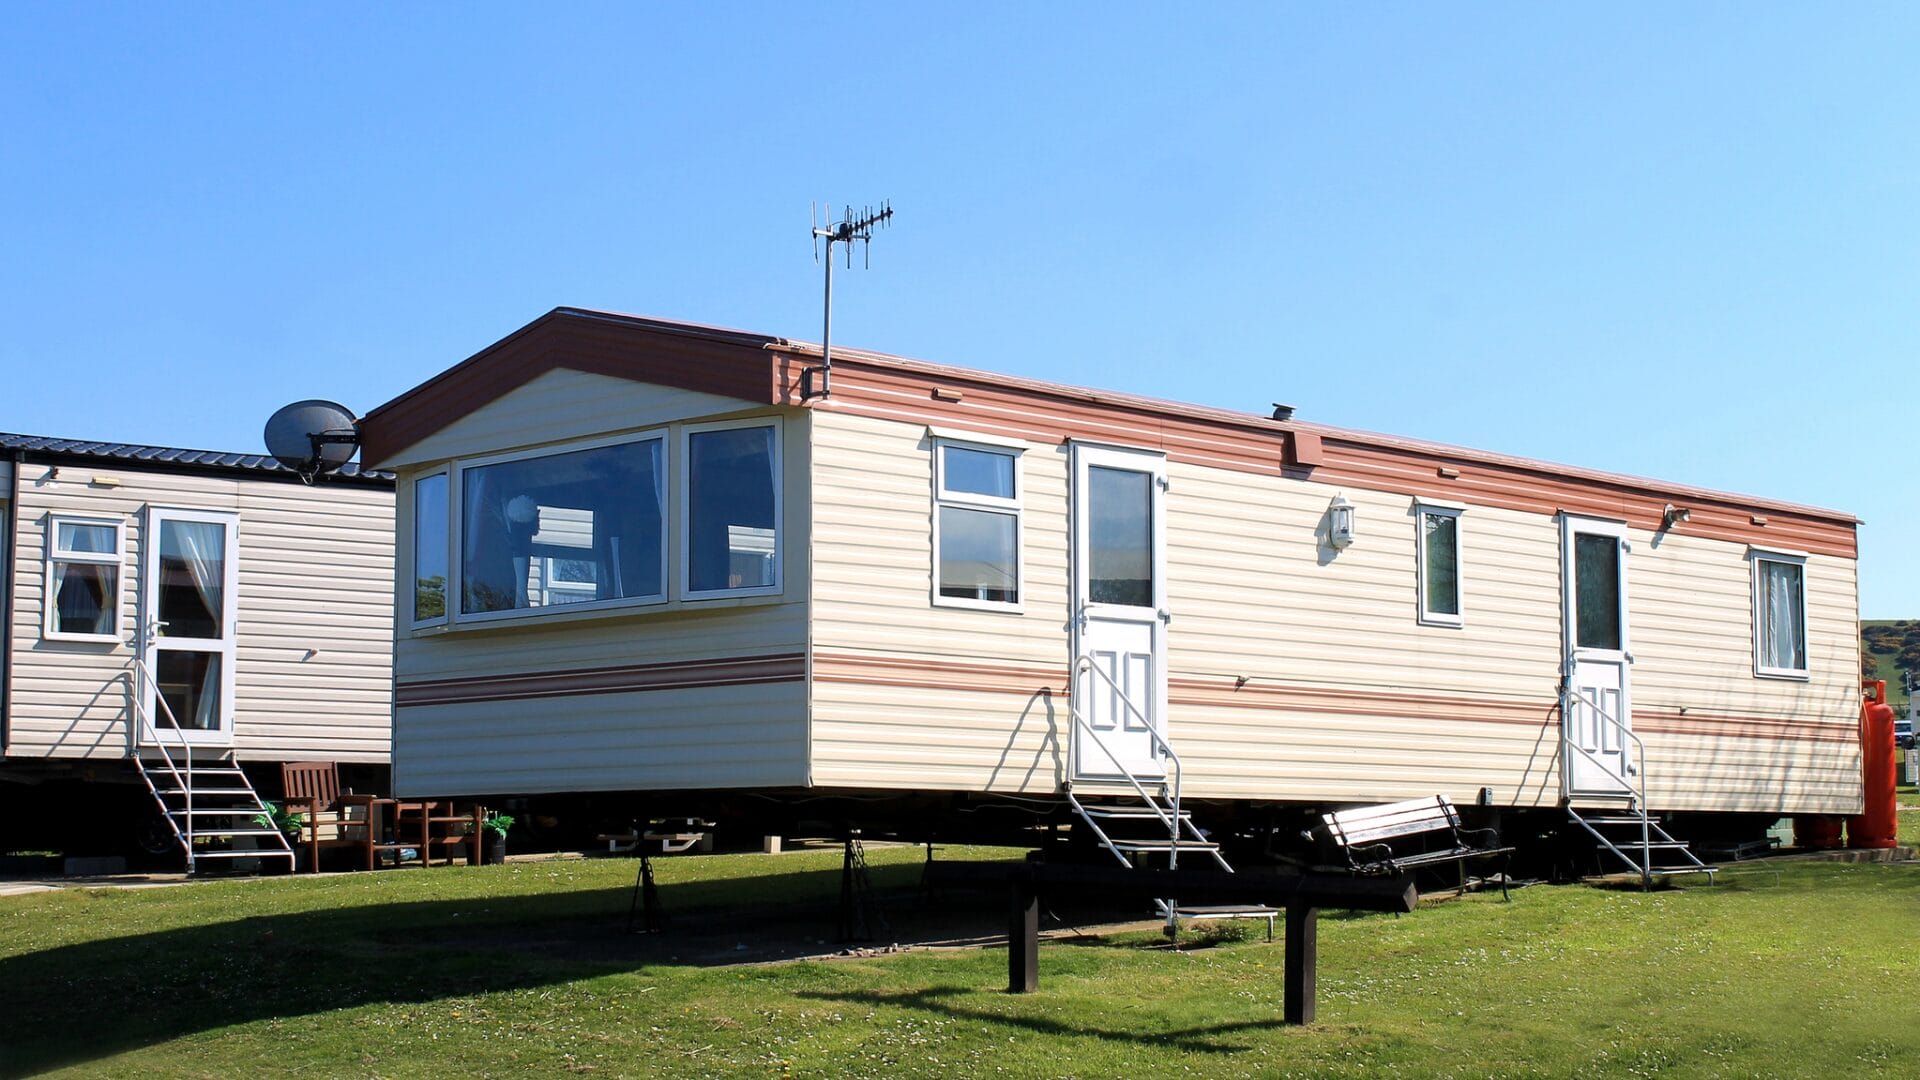 Modern caravans in use viewed from the side.